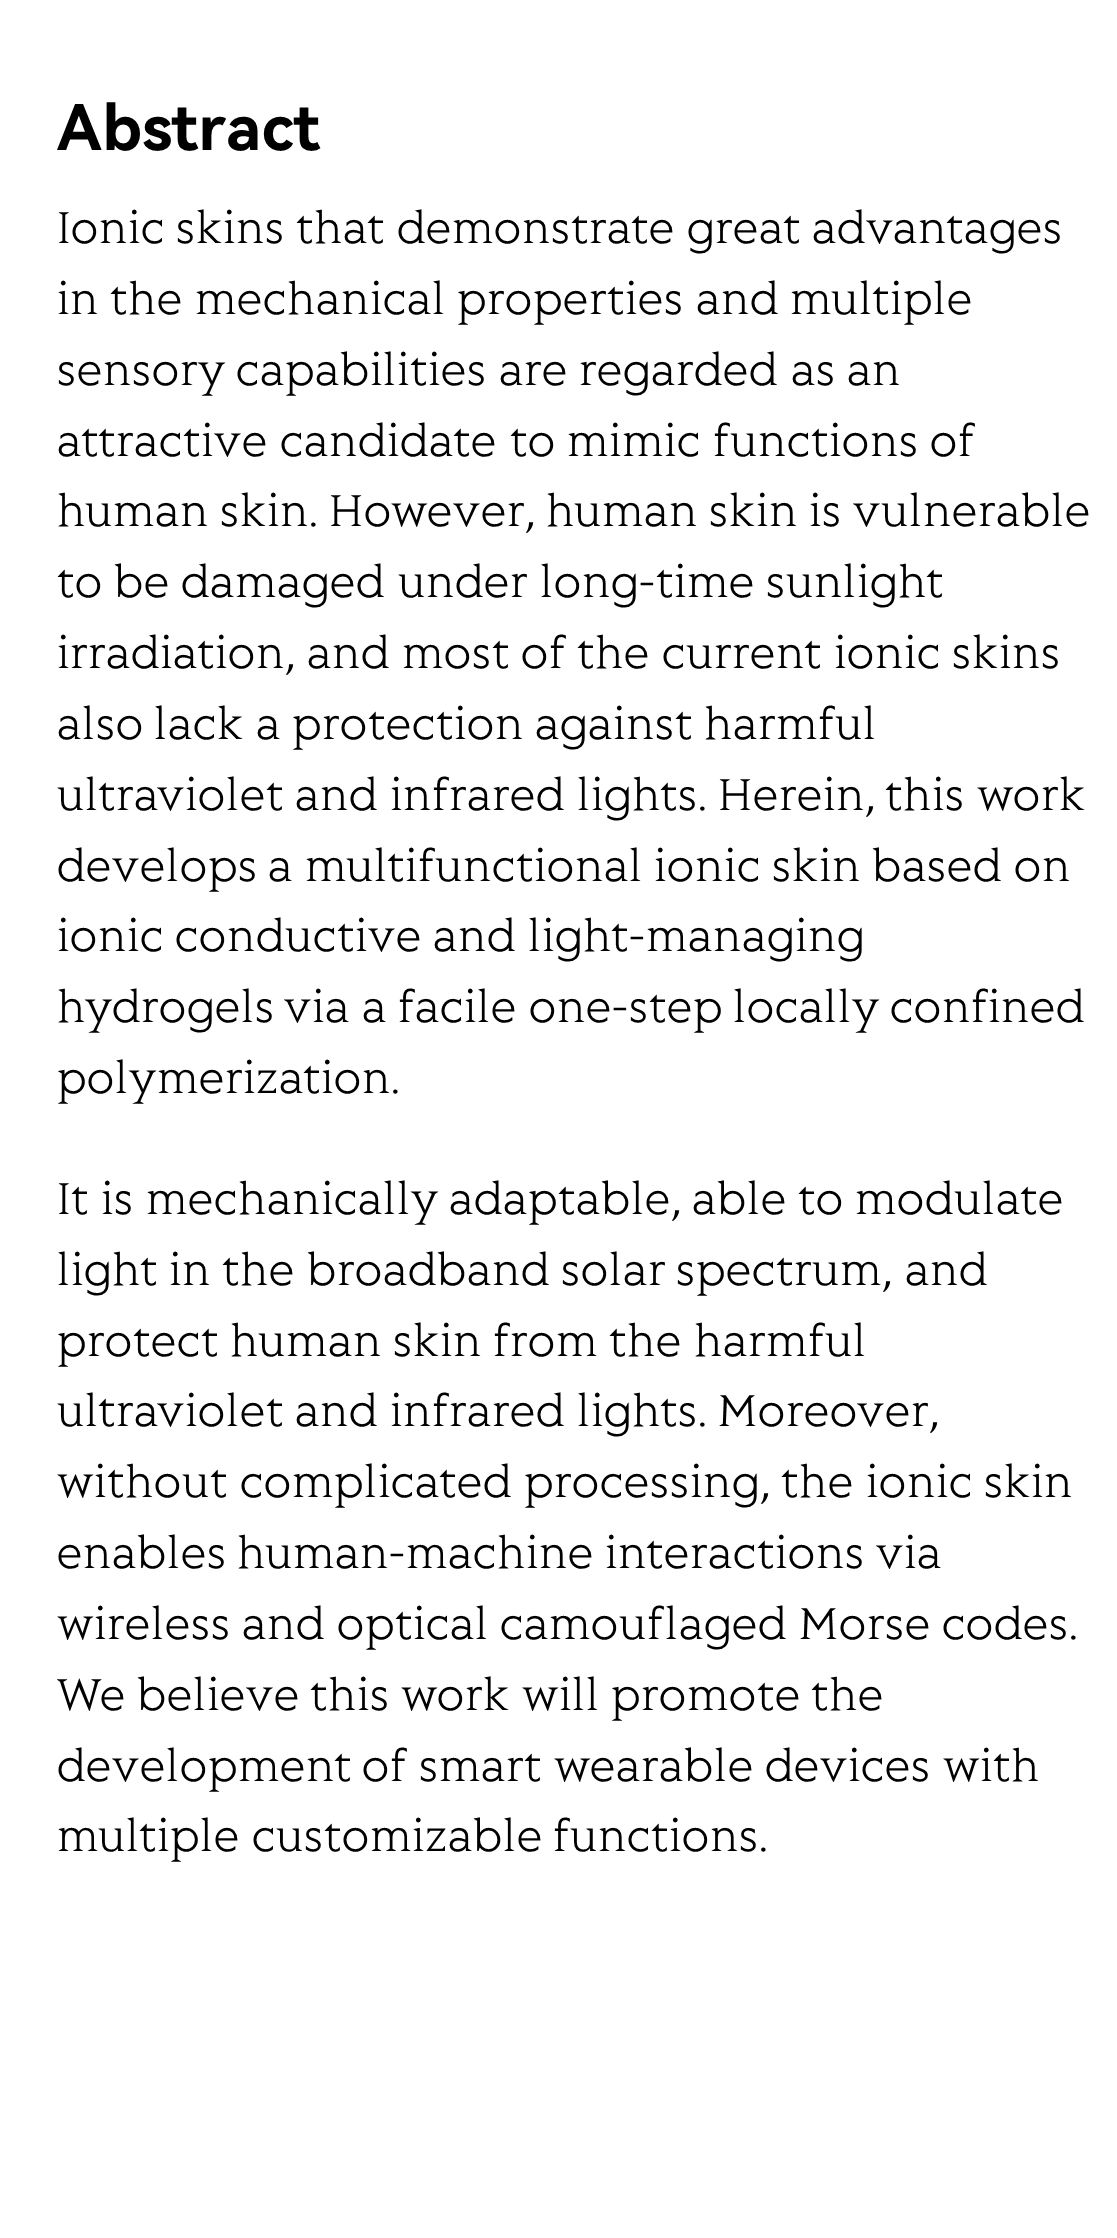 An intelligent light-managing ionic skin for UV-protection, IR stealth, and optical camouflaged Morse codes_2